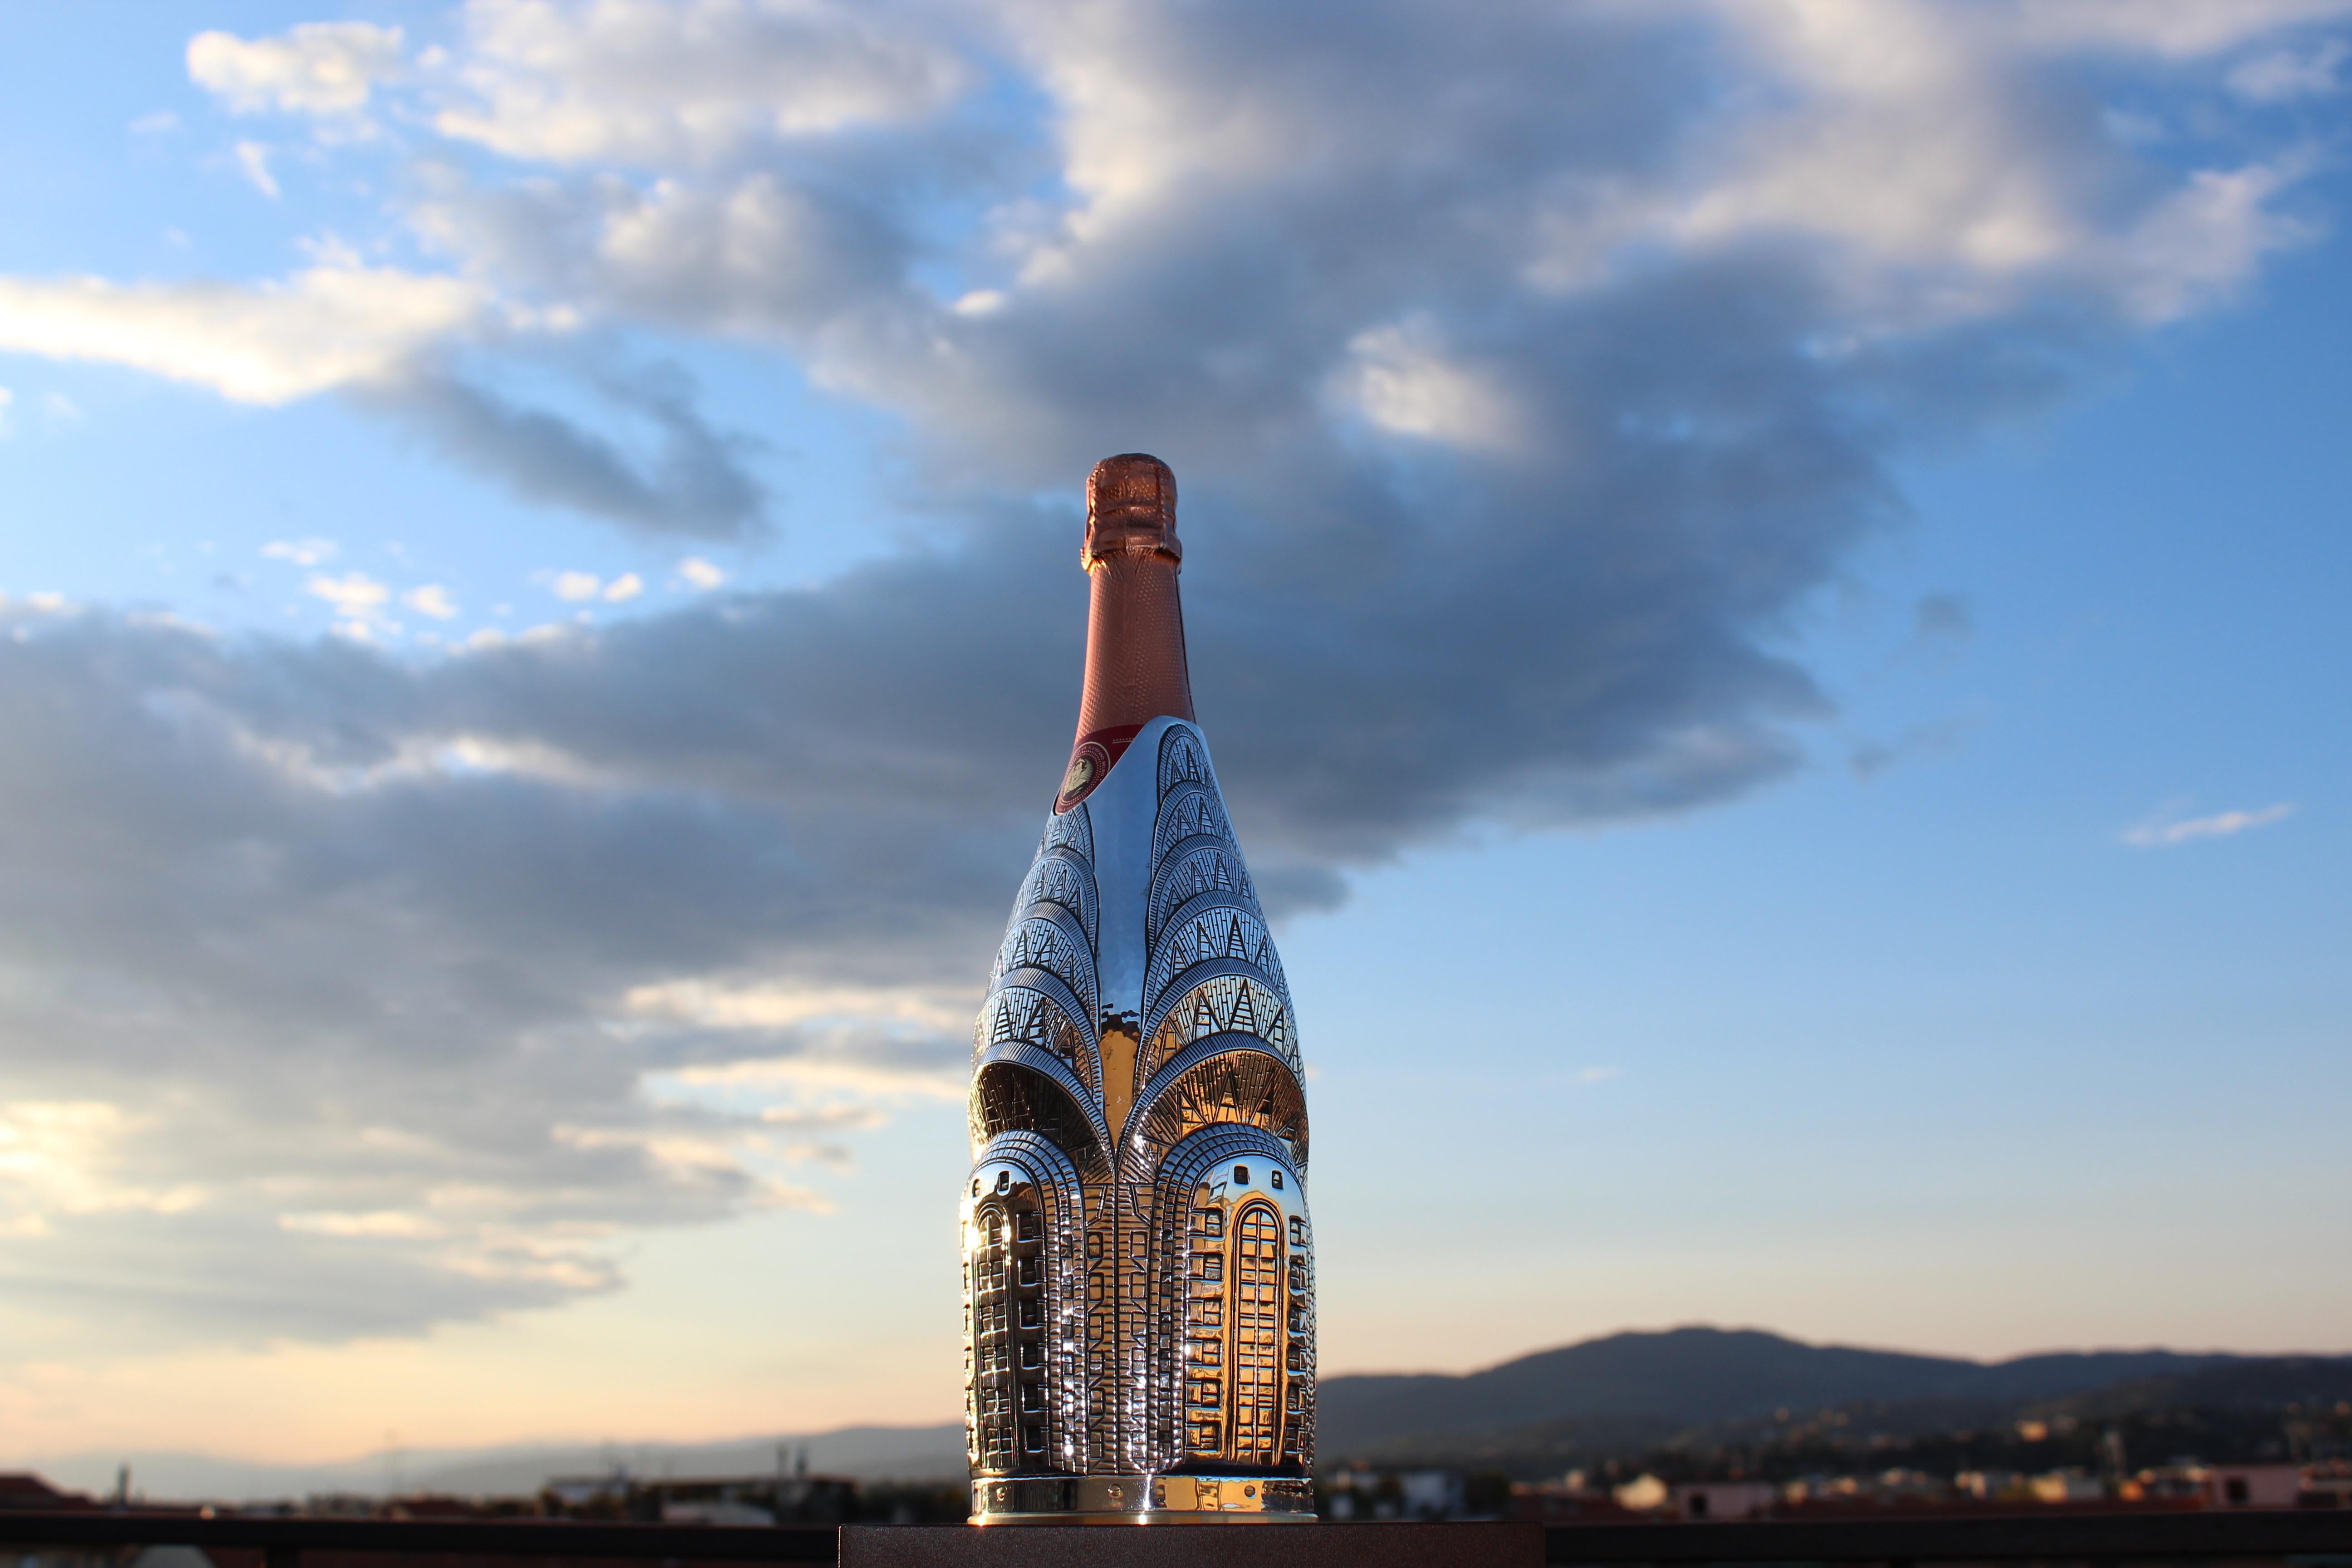 This champagne cover/glacette belongs to the collection: works of art. The oeuvre was realized by a Florentine artist who wanted to celebrate the well-known Chrysler building.
The cover has been completely handcrafted by Marco Fedi, a Florentine